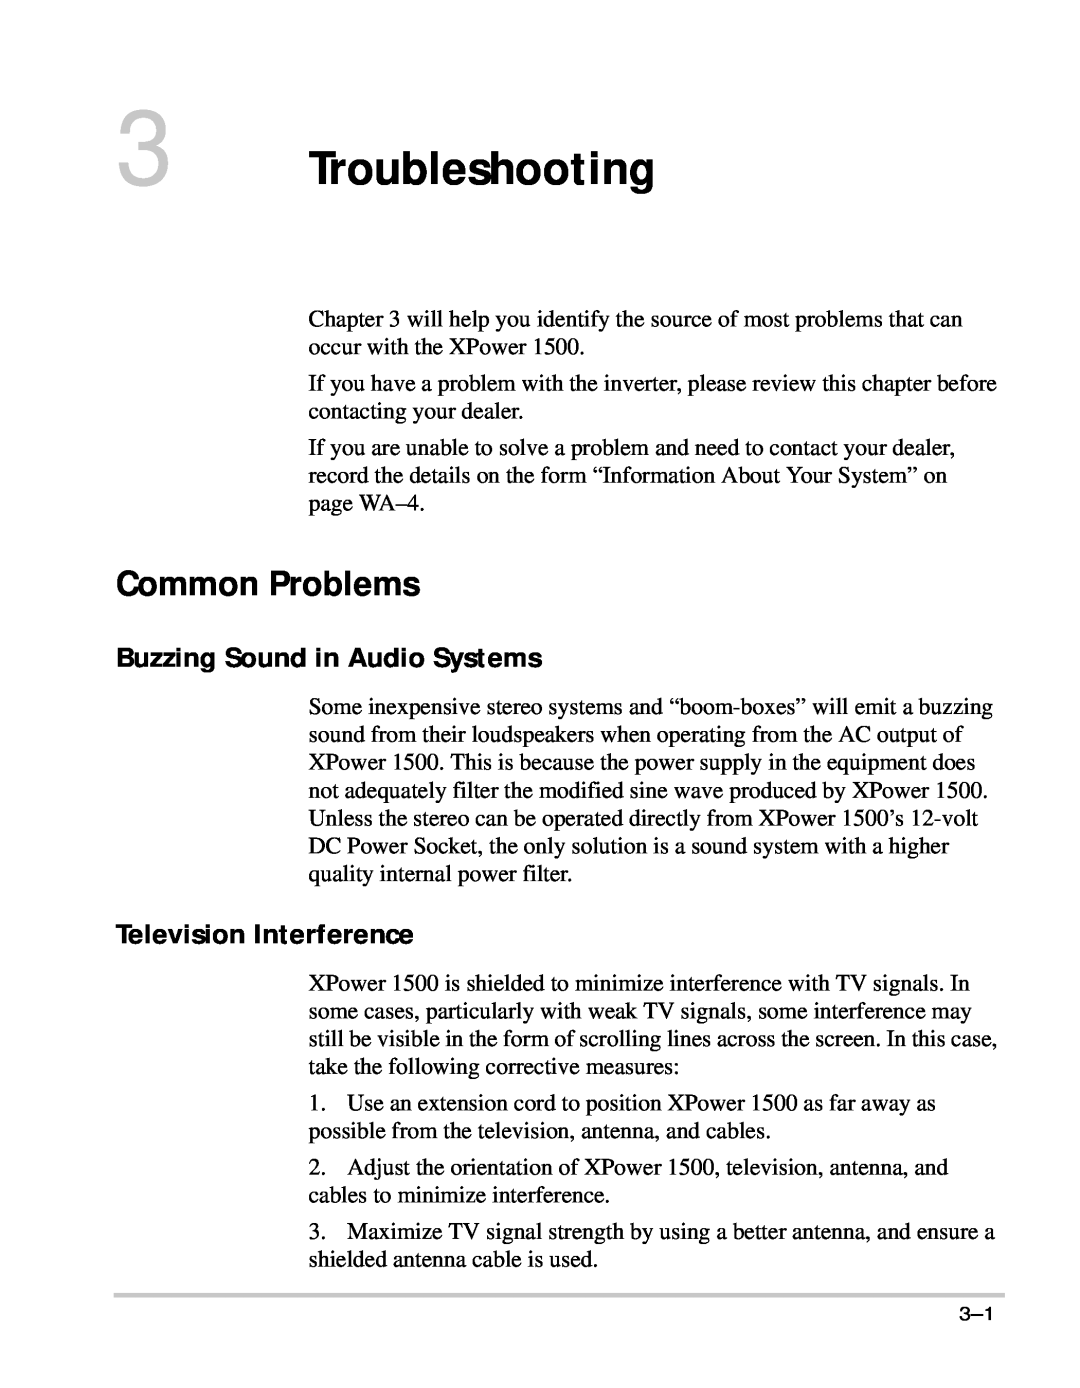 Xantrex Technology 1500 manual Troubleshooting, Common Problems, Buzzing Sound in Audio Systems, Television Interference 